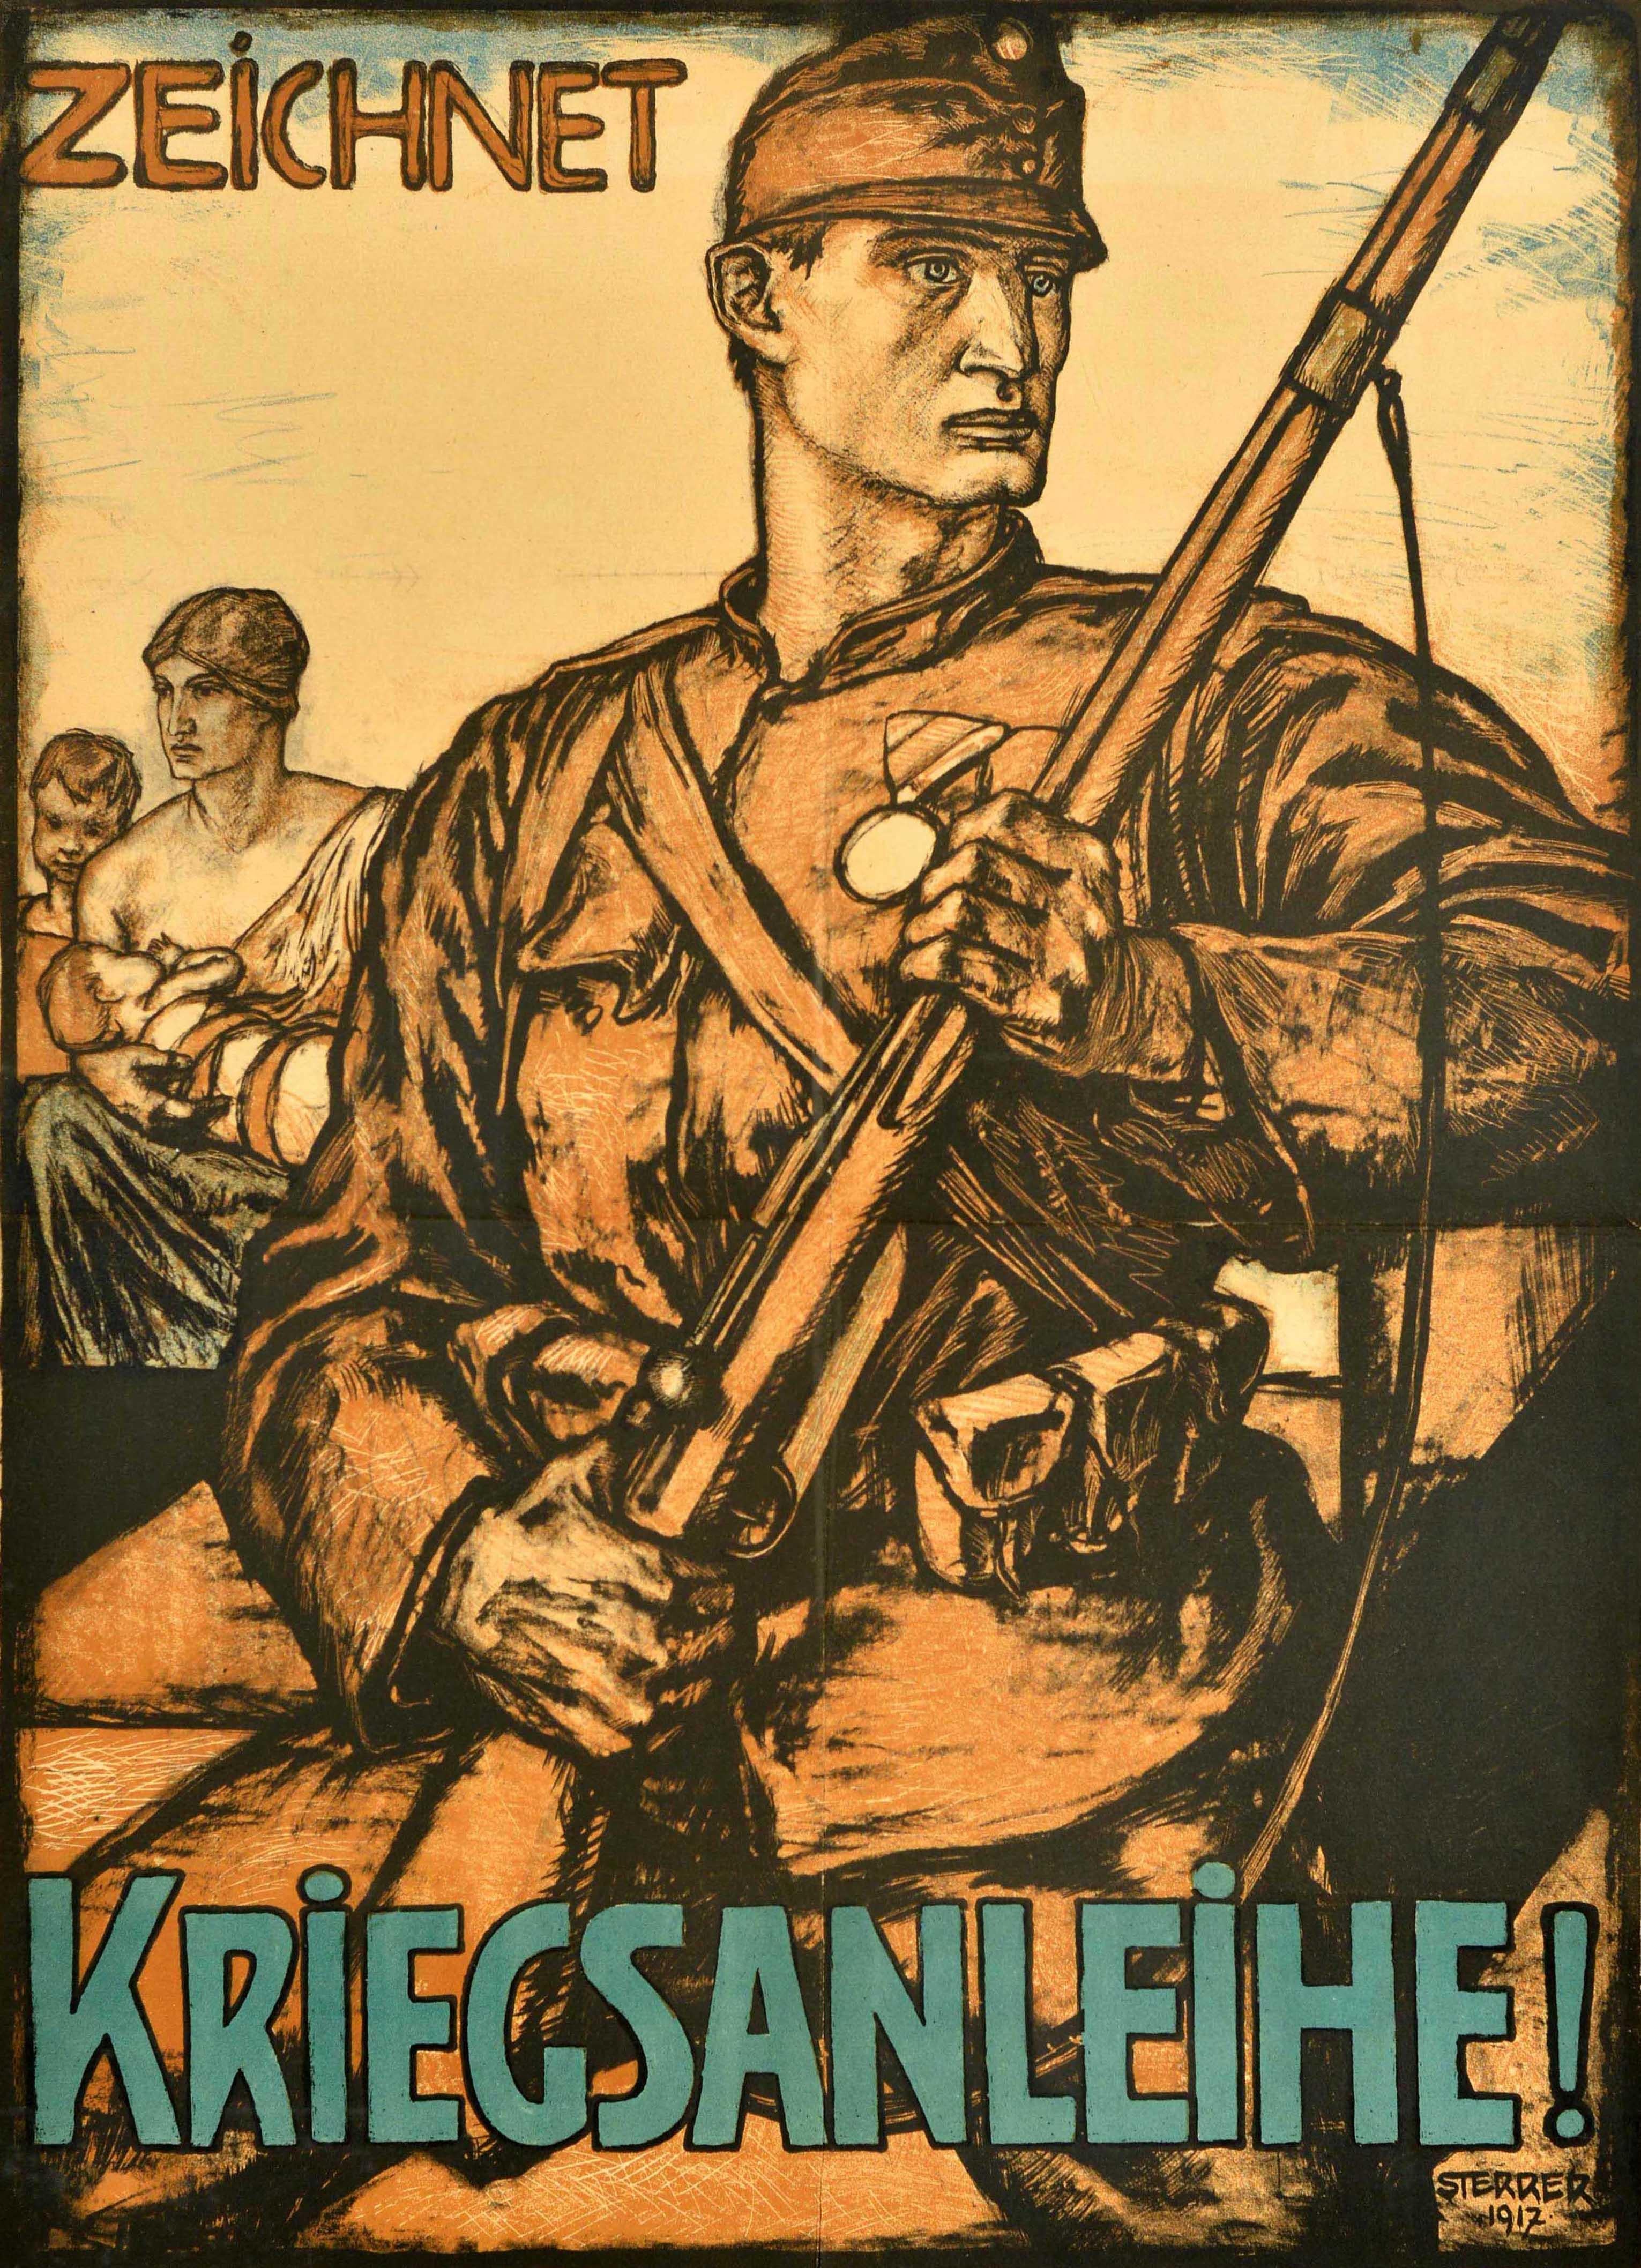 Original antique World War One war bond poster - Subscribe to the War Loan Imperial and Royal Chartered Viennese Bank Association / Zeichnet Kriegsanleihe! K.k. Priv. Wiener Bank-Verein - features a soldier holding a rifle gun with a medal on his